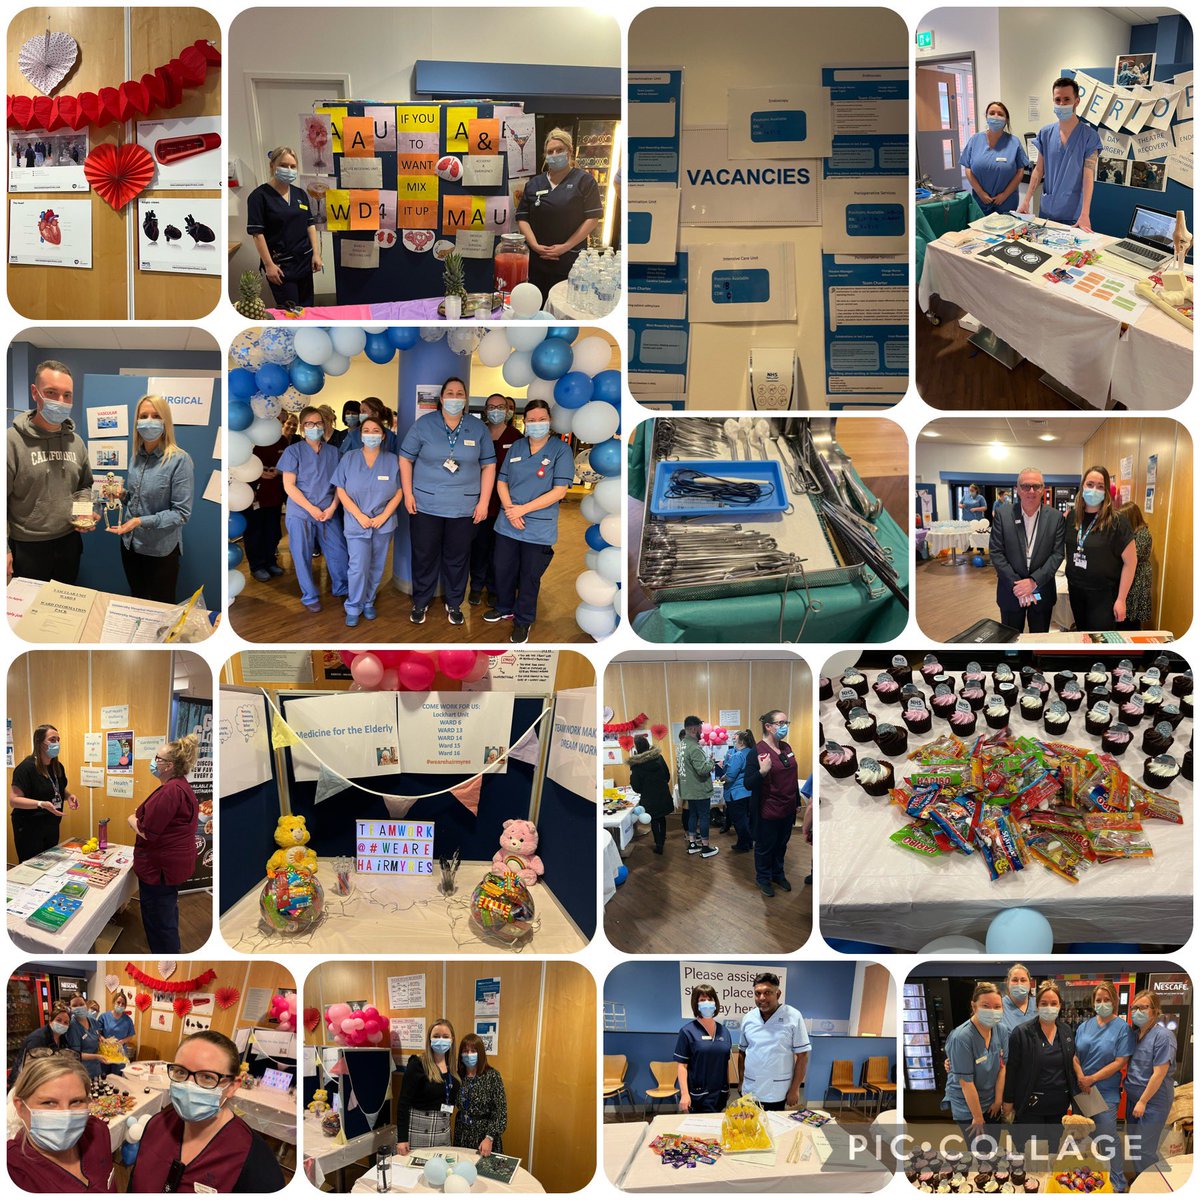 Thank you to everyone @wearehairmyres for making our Recruitment Day the success it was 💙A fabulous display of ‘teamwork’ 🥰@KirstyMcM_illan @lise_axford @dominique2603 @ShirleyanneOHar @jackiebaird68 @mariannestoppa2